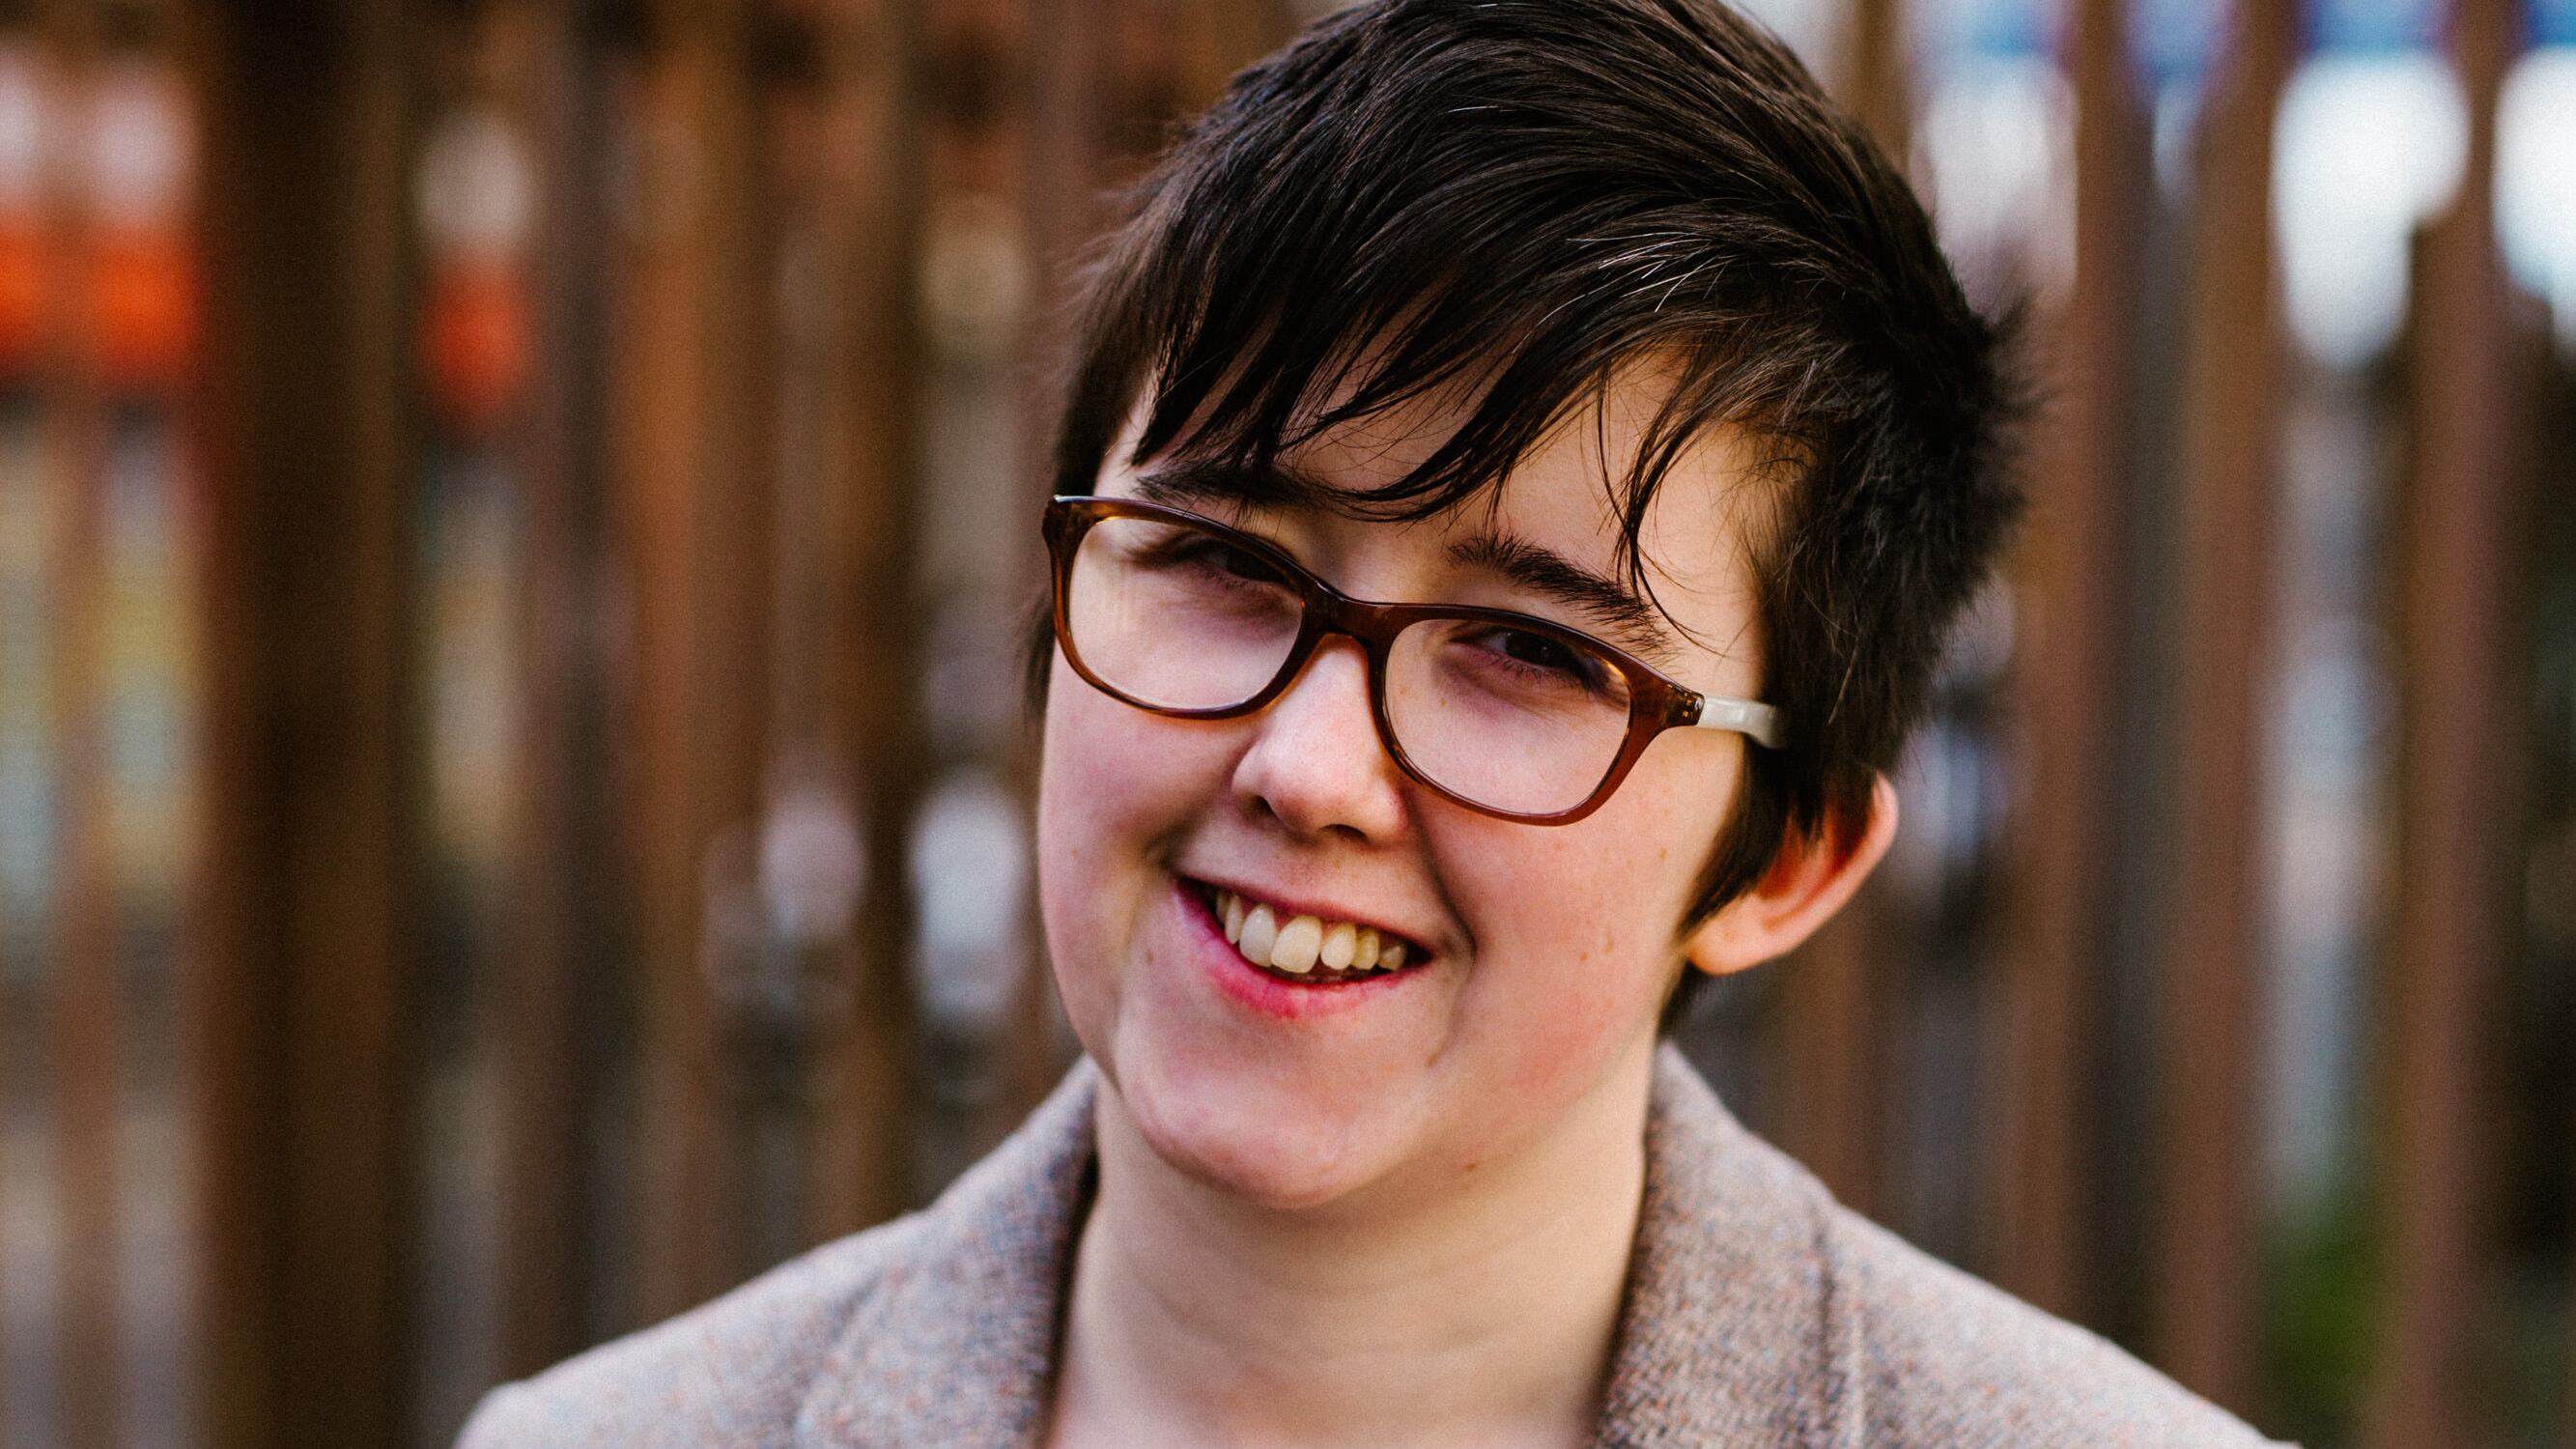 Lyra McKee died after being struck by a bullet in the Creggan area of Derry on April 18 2019